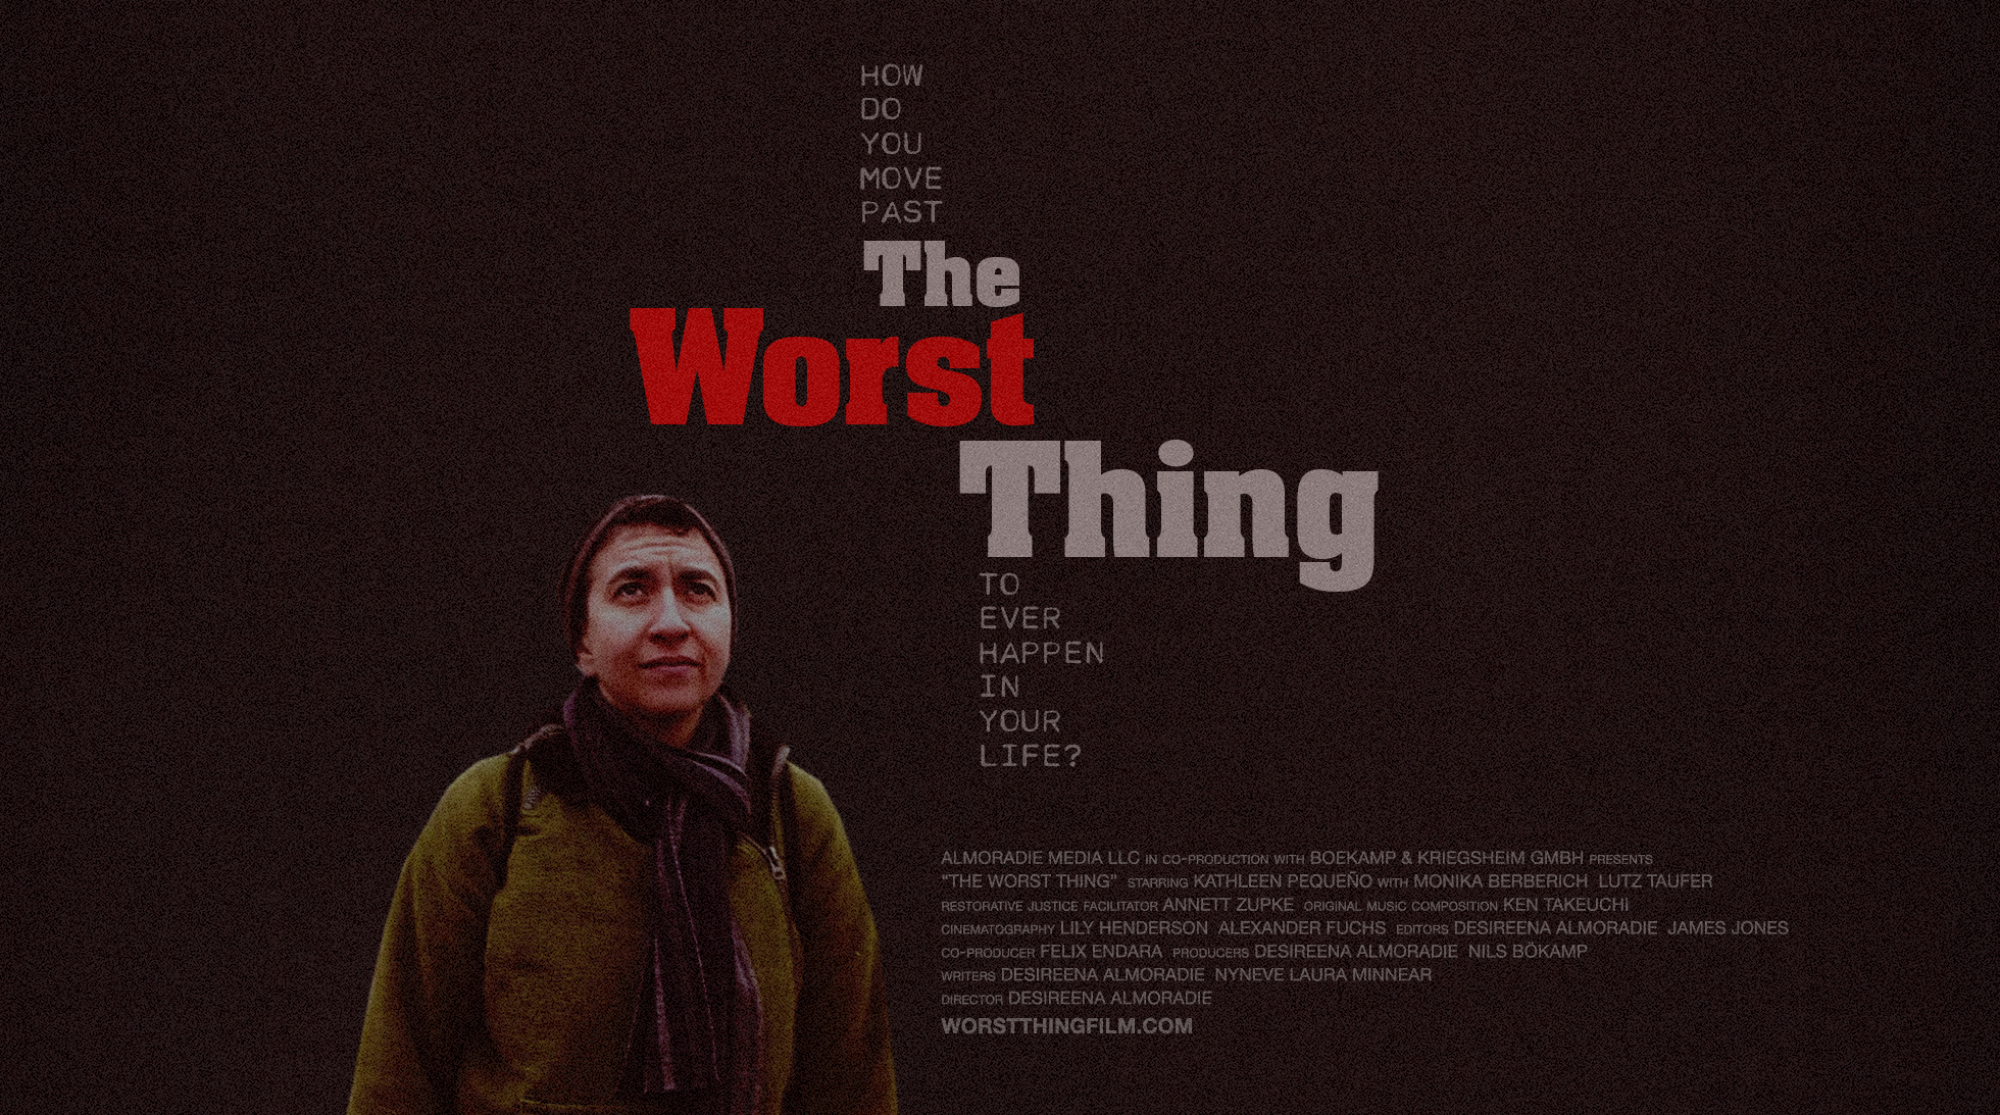 The Worst Thing (To Germany, With Love)